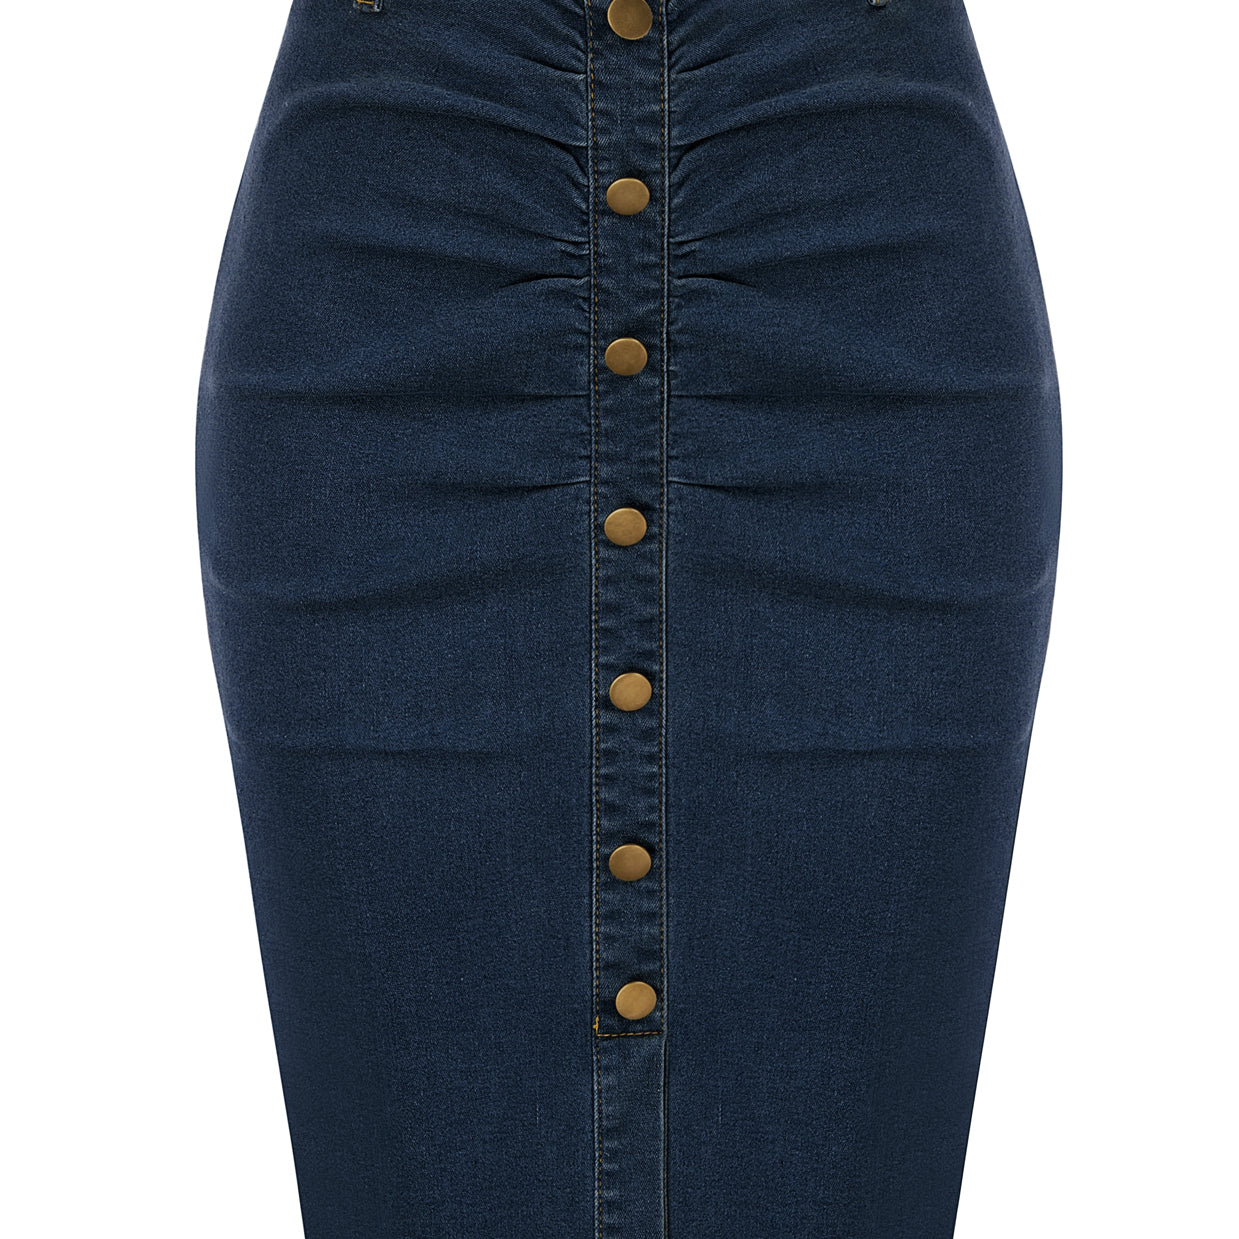 Vintage Jean Skirt with Belt High Waist Ruched Front Bodycon Skirt